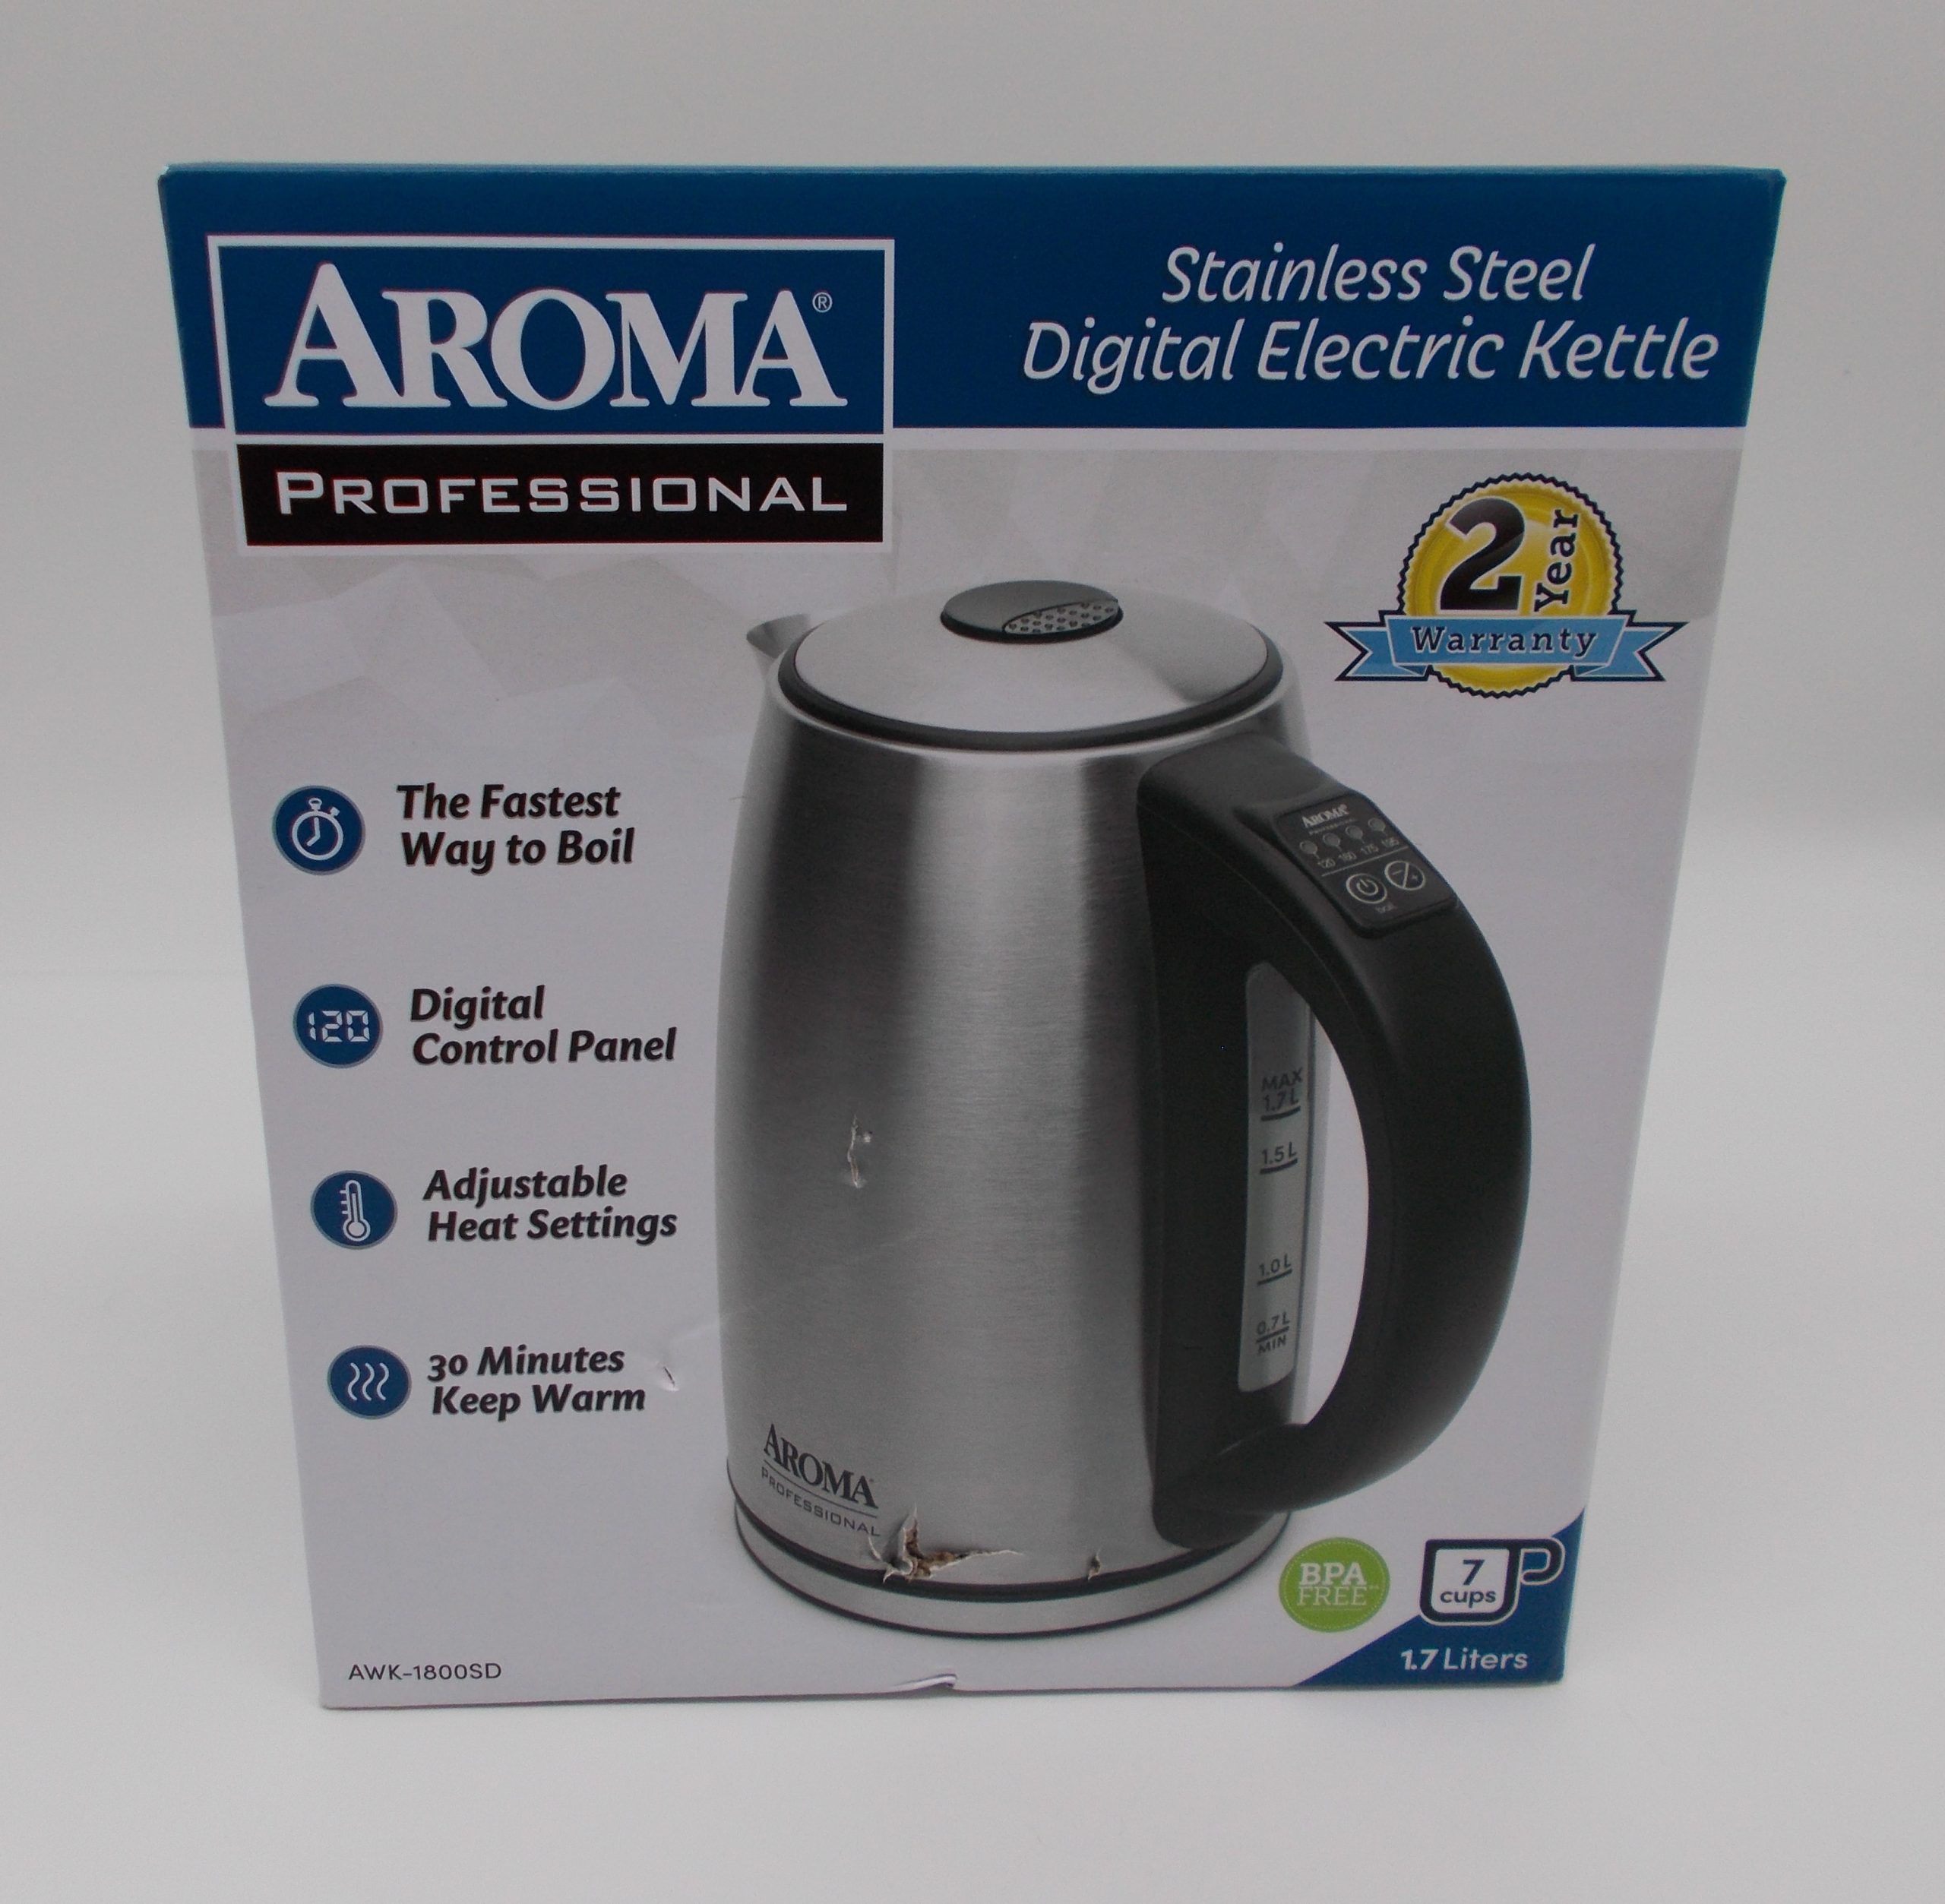 https://mapersons.com/wp-content/uploads/2021/01/Aroma-Kettle-6-scaled.jpg